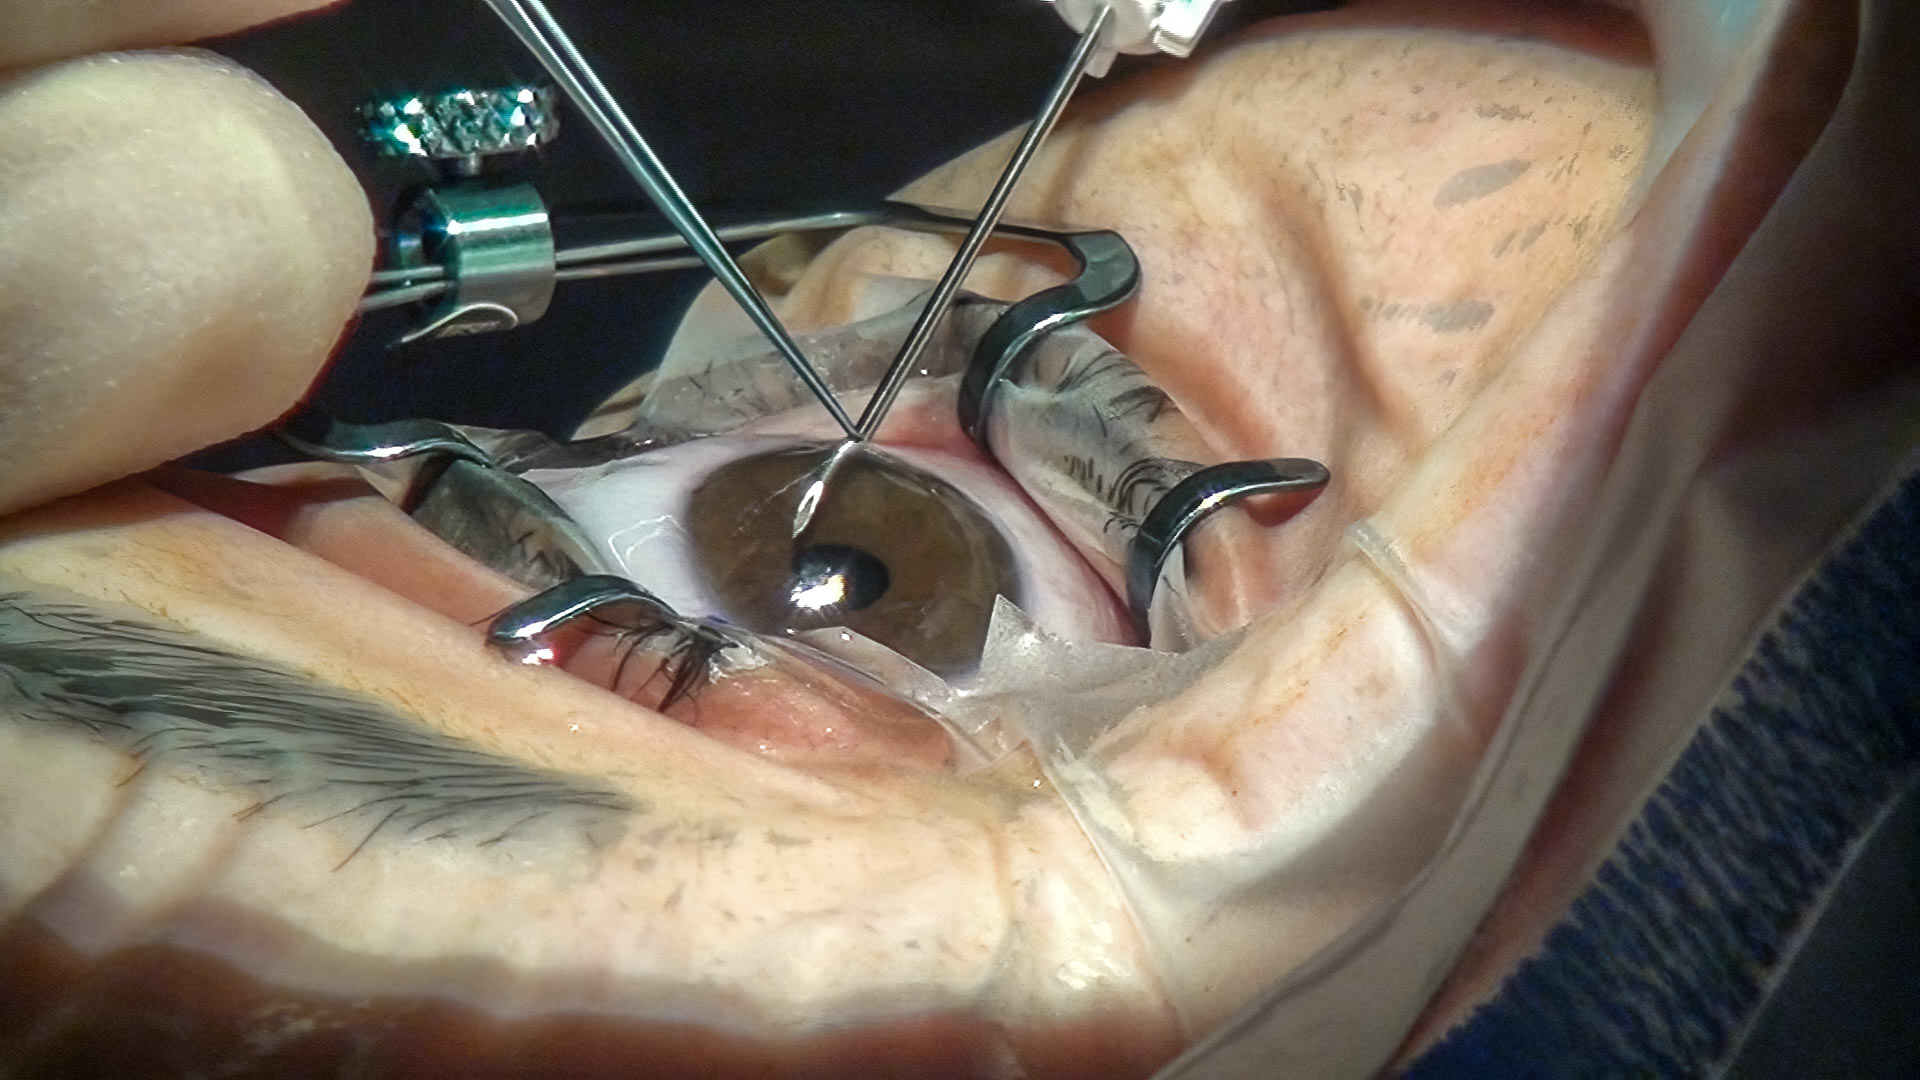 Figure 1: A minimally invasive glaucoma surgery device is implanted through the anterior chamber. Photo Credit: © Keith Barton CC BY-NC 4.0